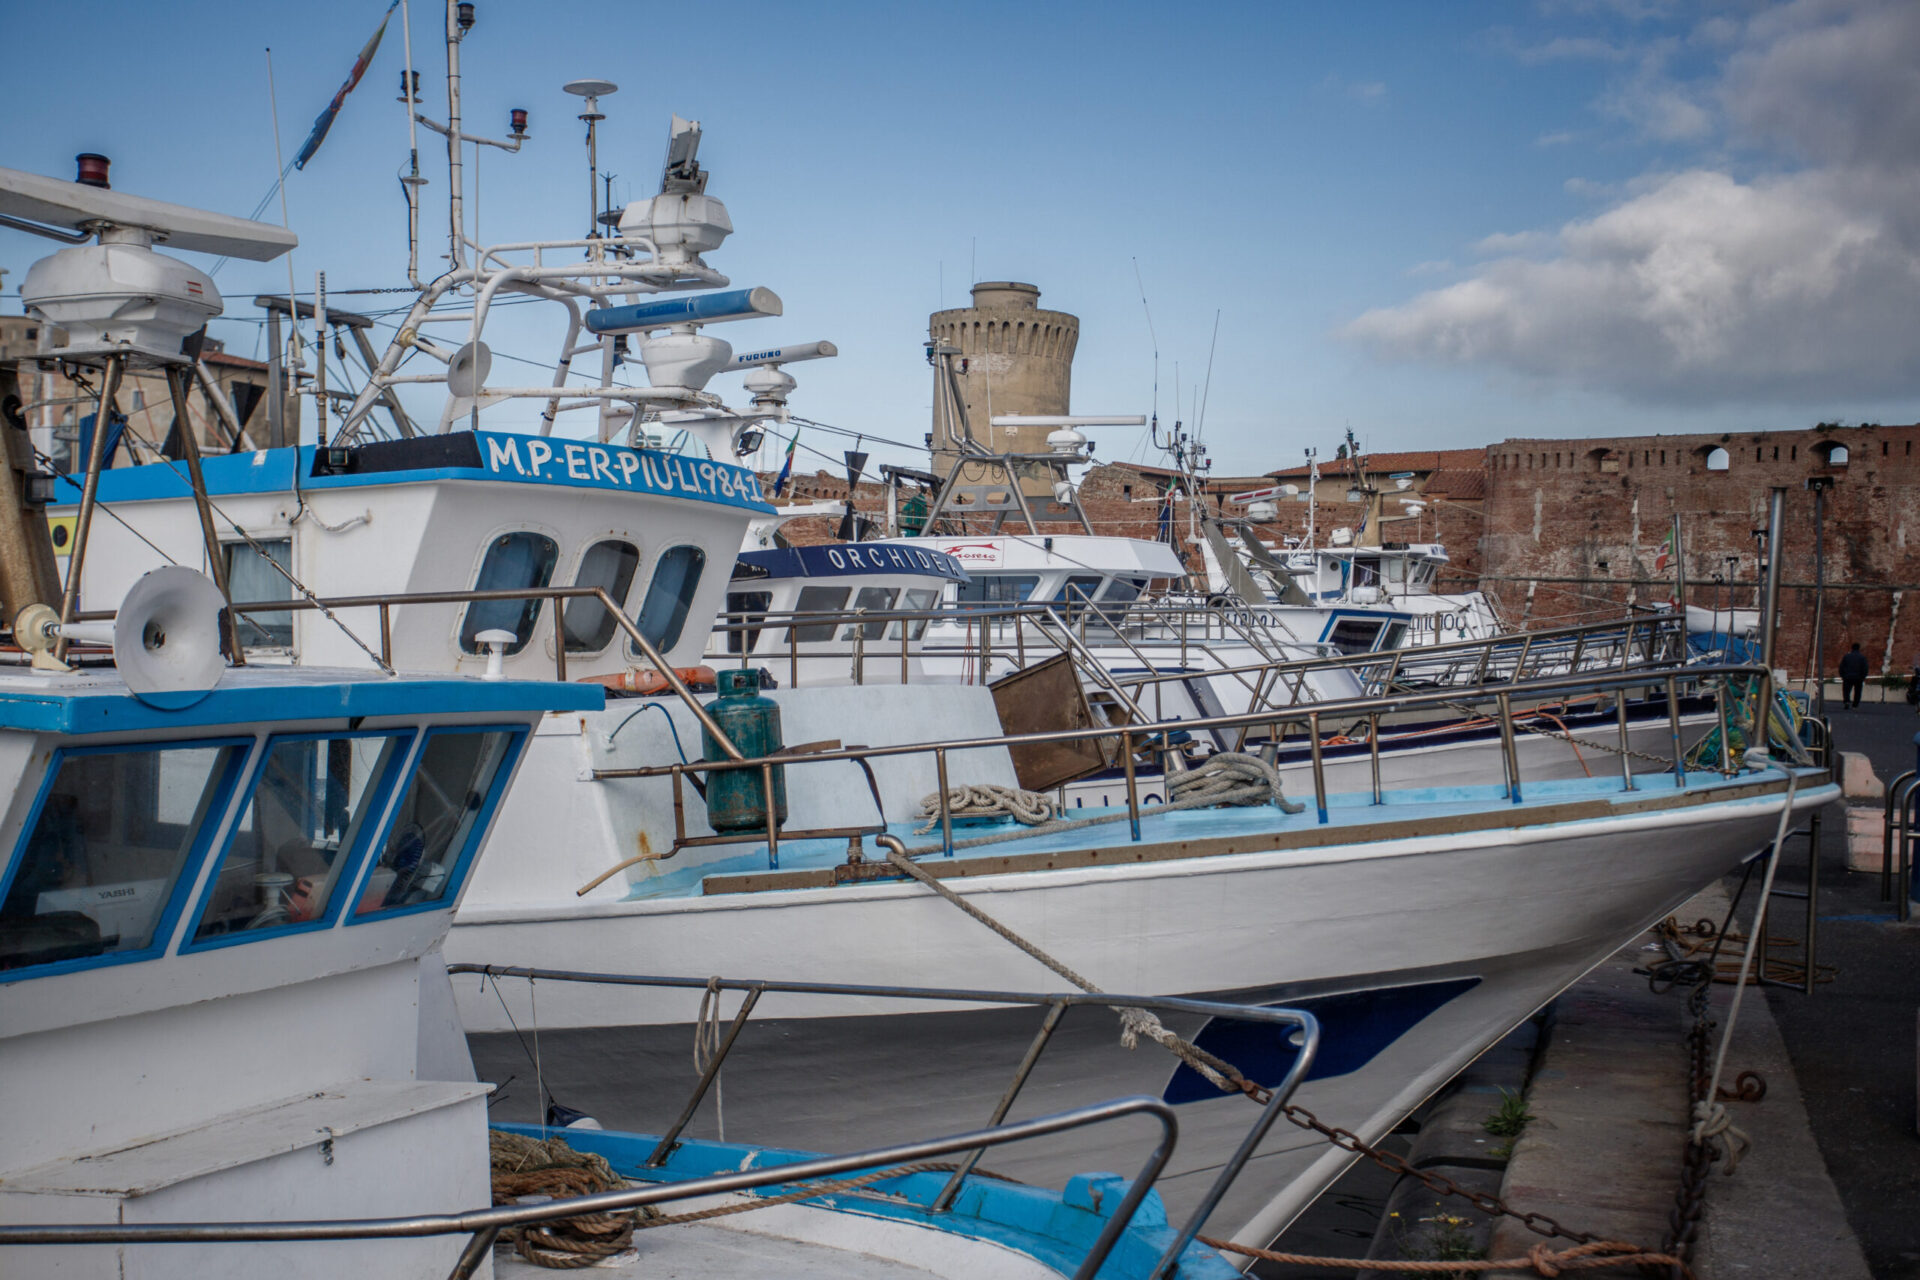 Livorno: a sea of activities for all tastes